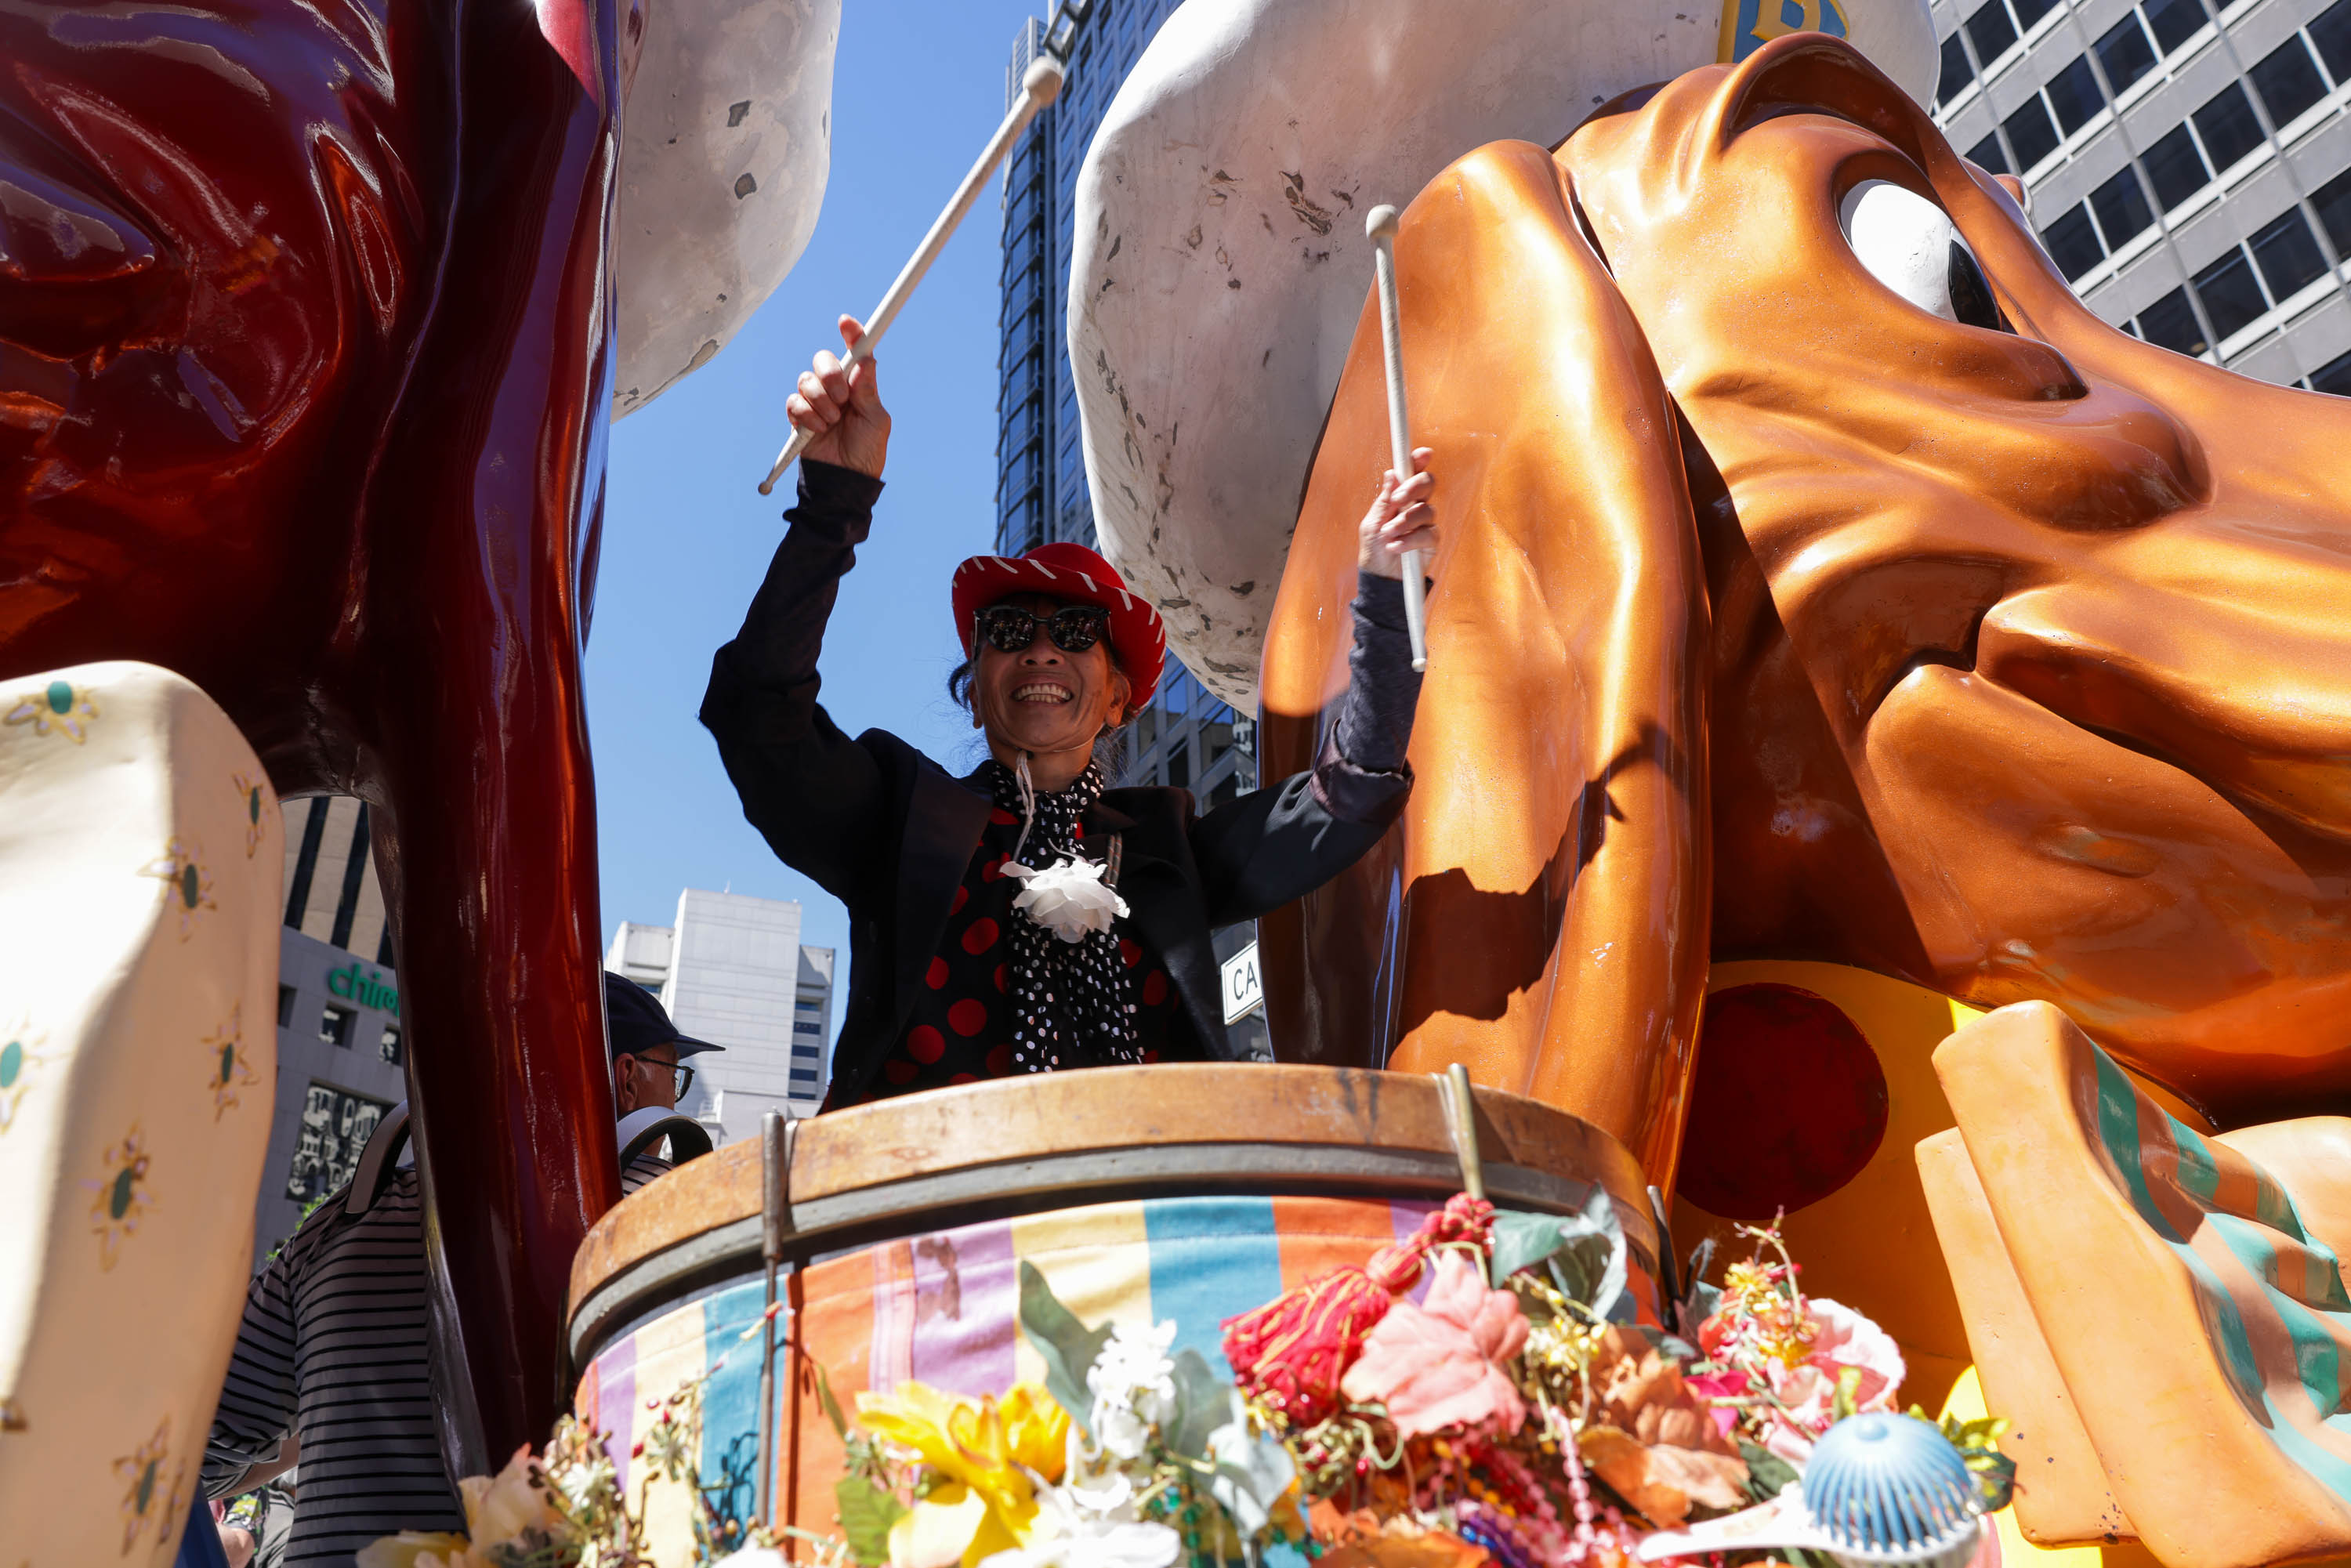 A person in a red hat and polka-dot outfit plays drums on a colorful float with large chicken sculptures towering behind.